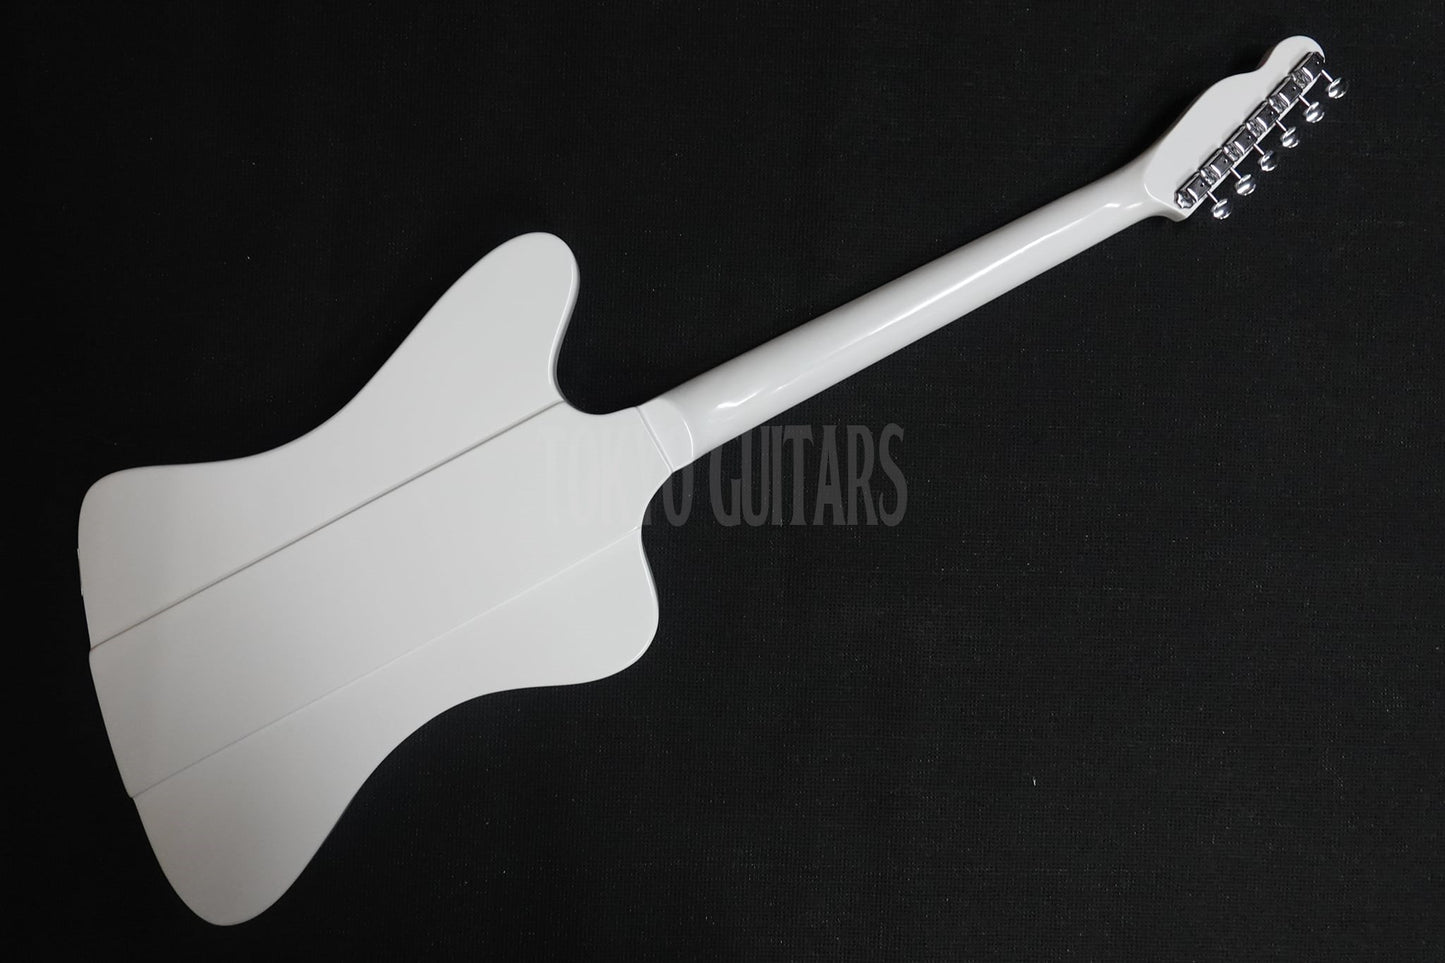 FB-90 (Solid White)